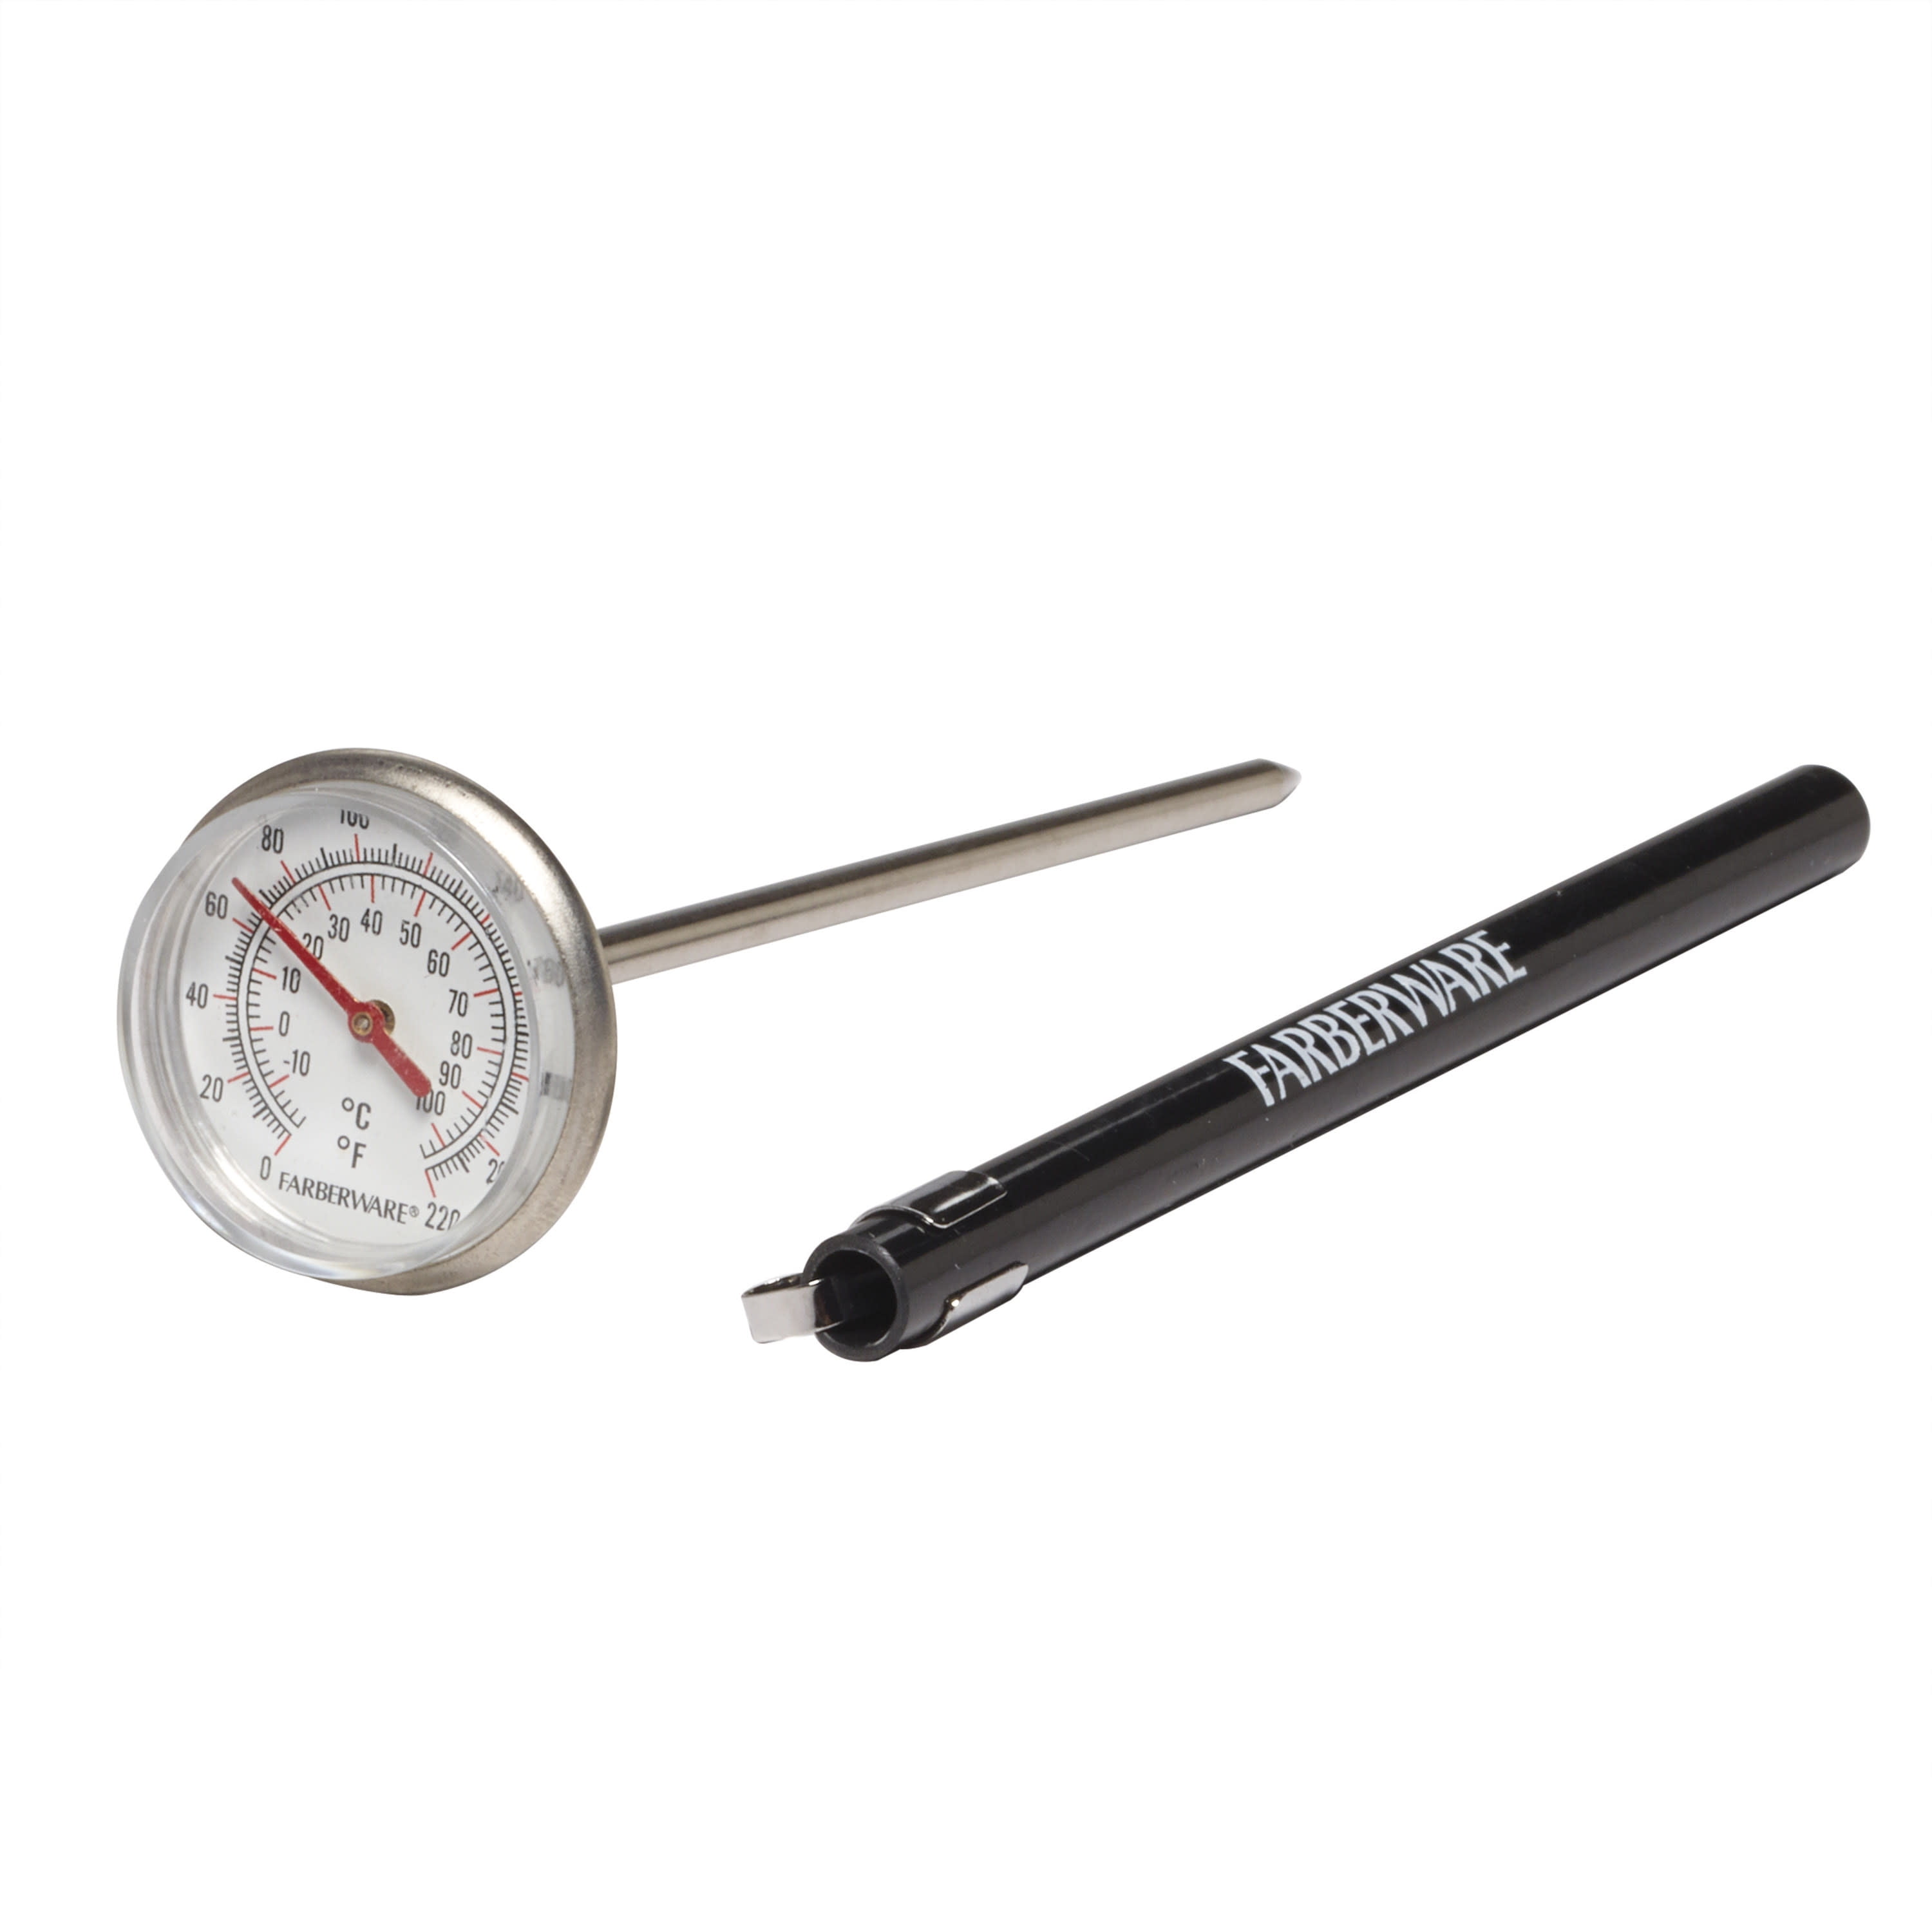 Always in Stock - Traceable Calibrated Digital Pocket Thermometer